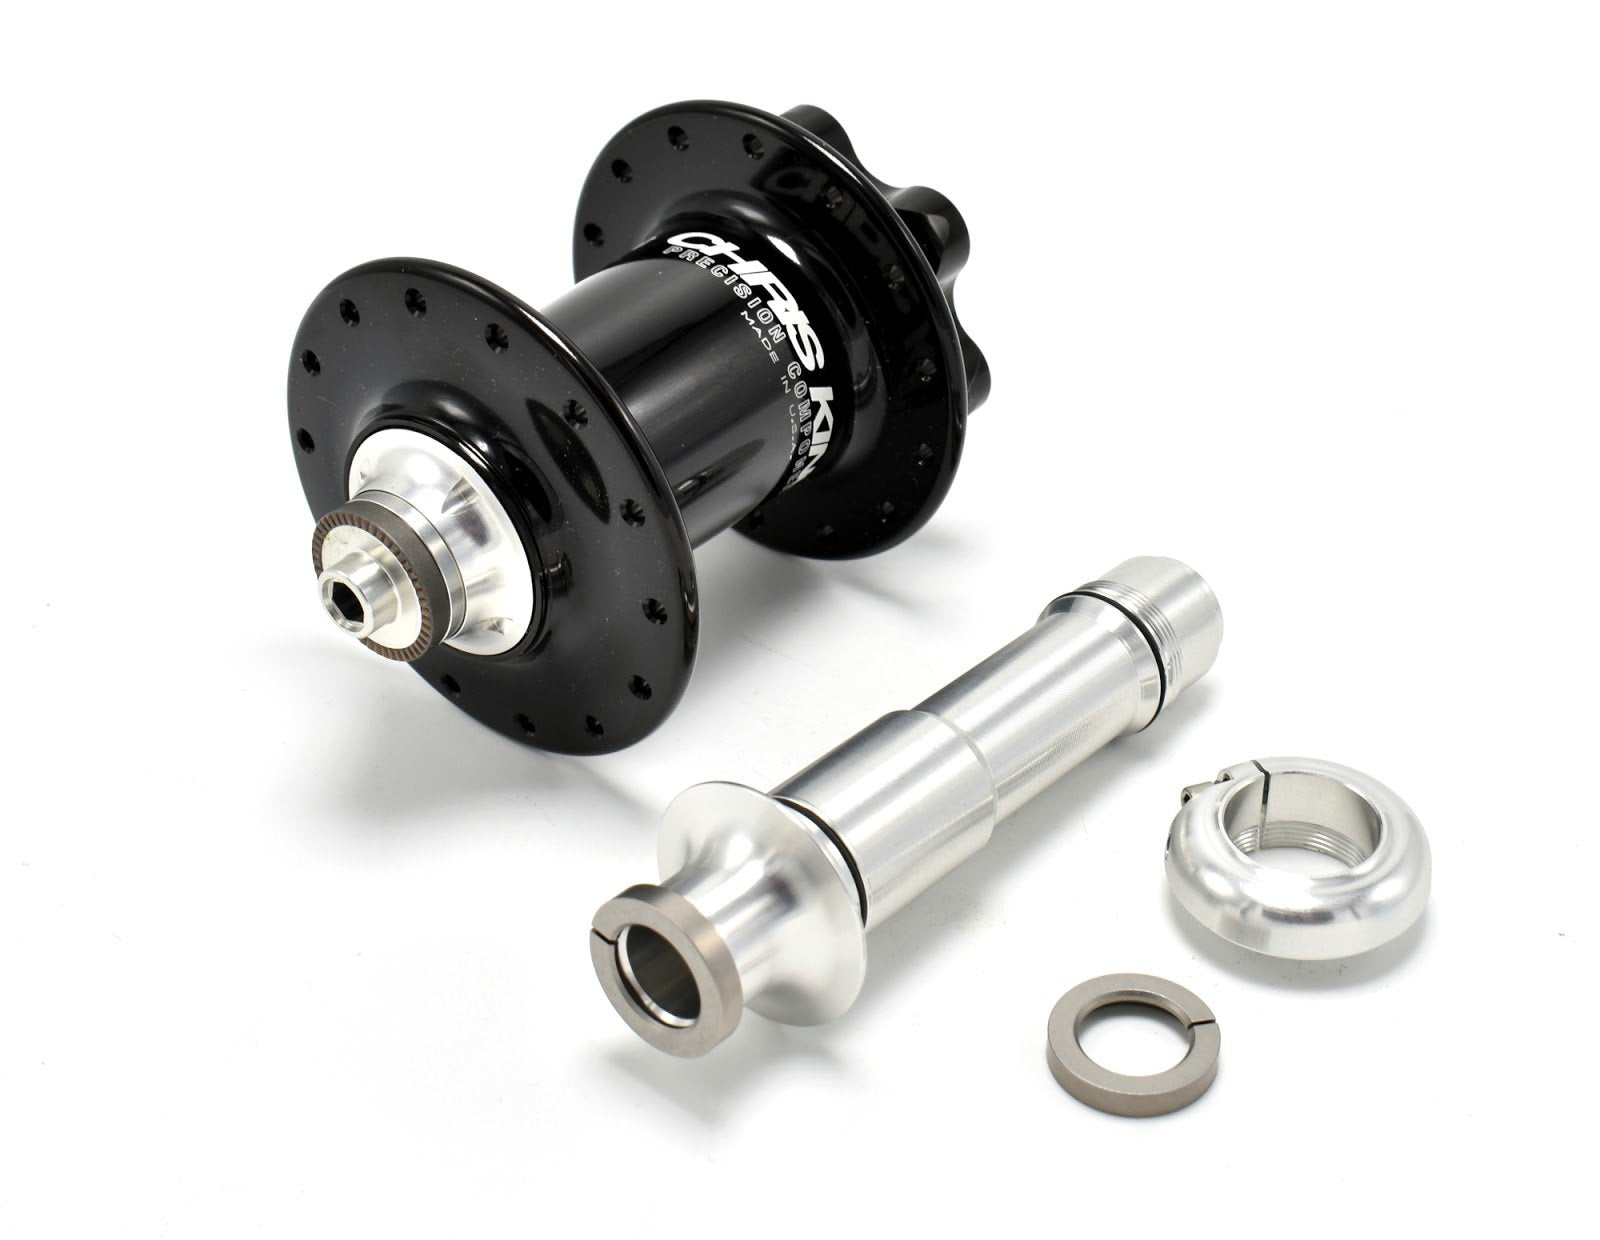 Upgrading the axle on your Chris King ISO Disc hubs.